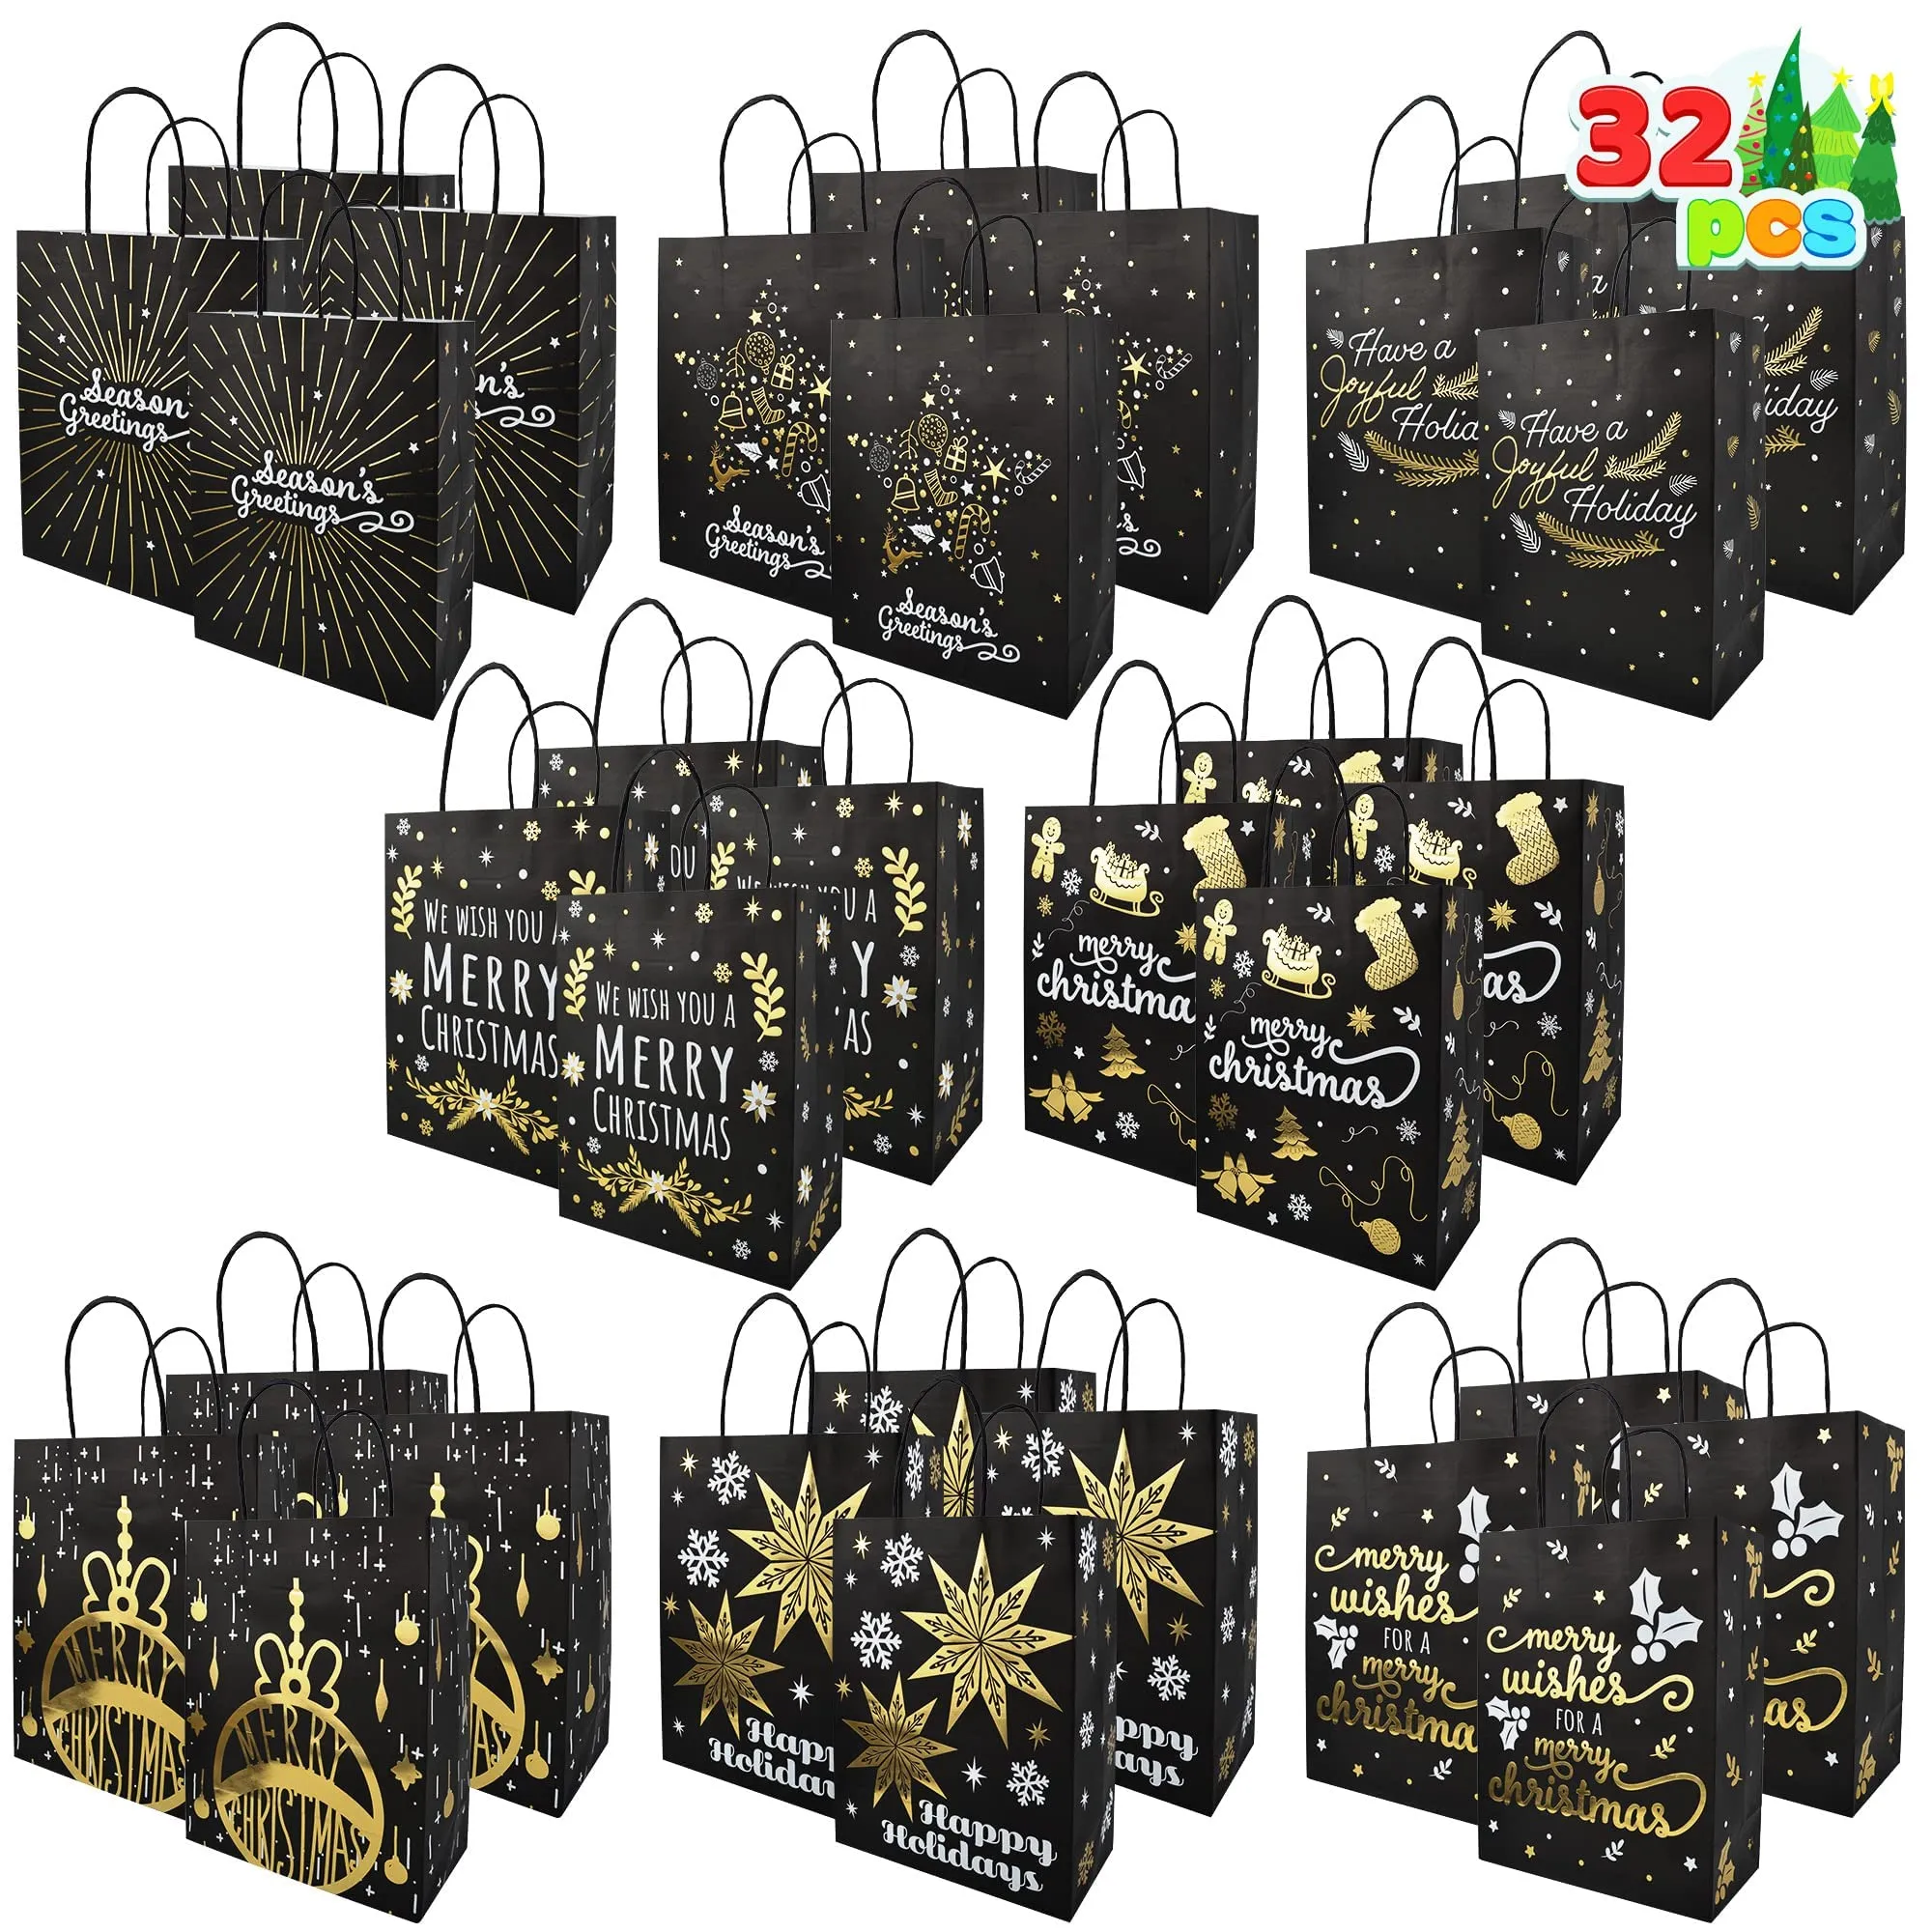 ECOHOLA Black and Gold Foil Paper Gift Bags with Black Handles, 25 Pieces  Metallic Gold Foil Polka Dot for Presents, Retails, Christmas or New Year